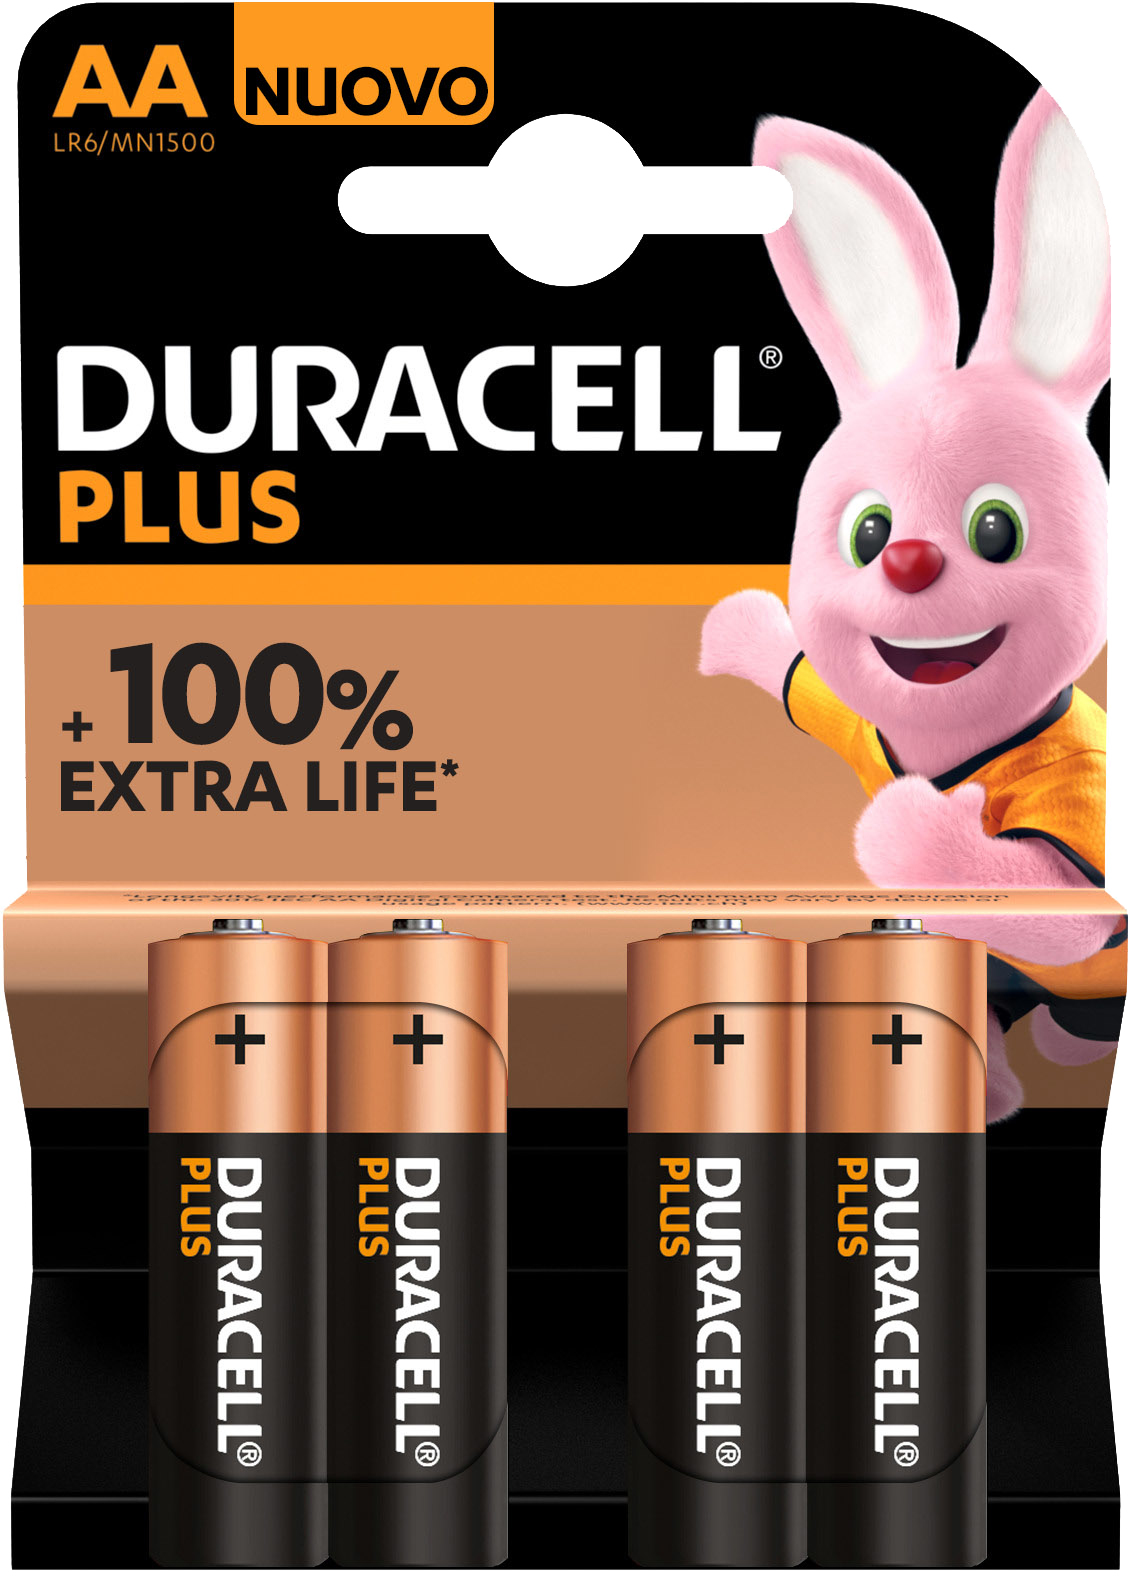 Duracell AA Plus 100% 4-pack